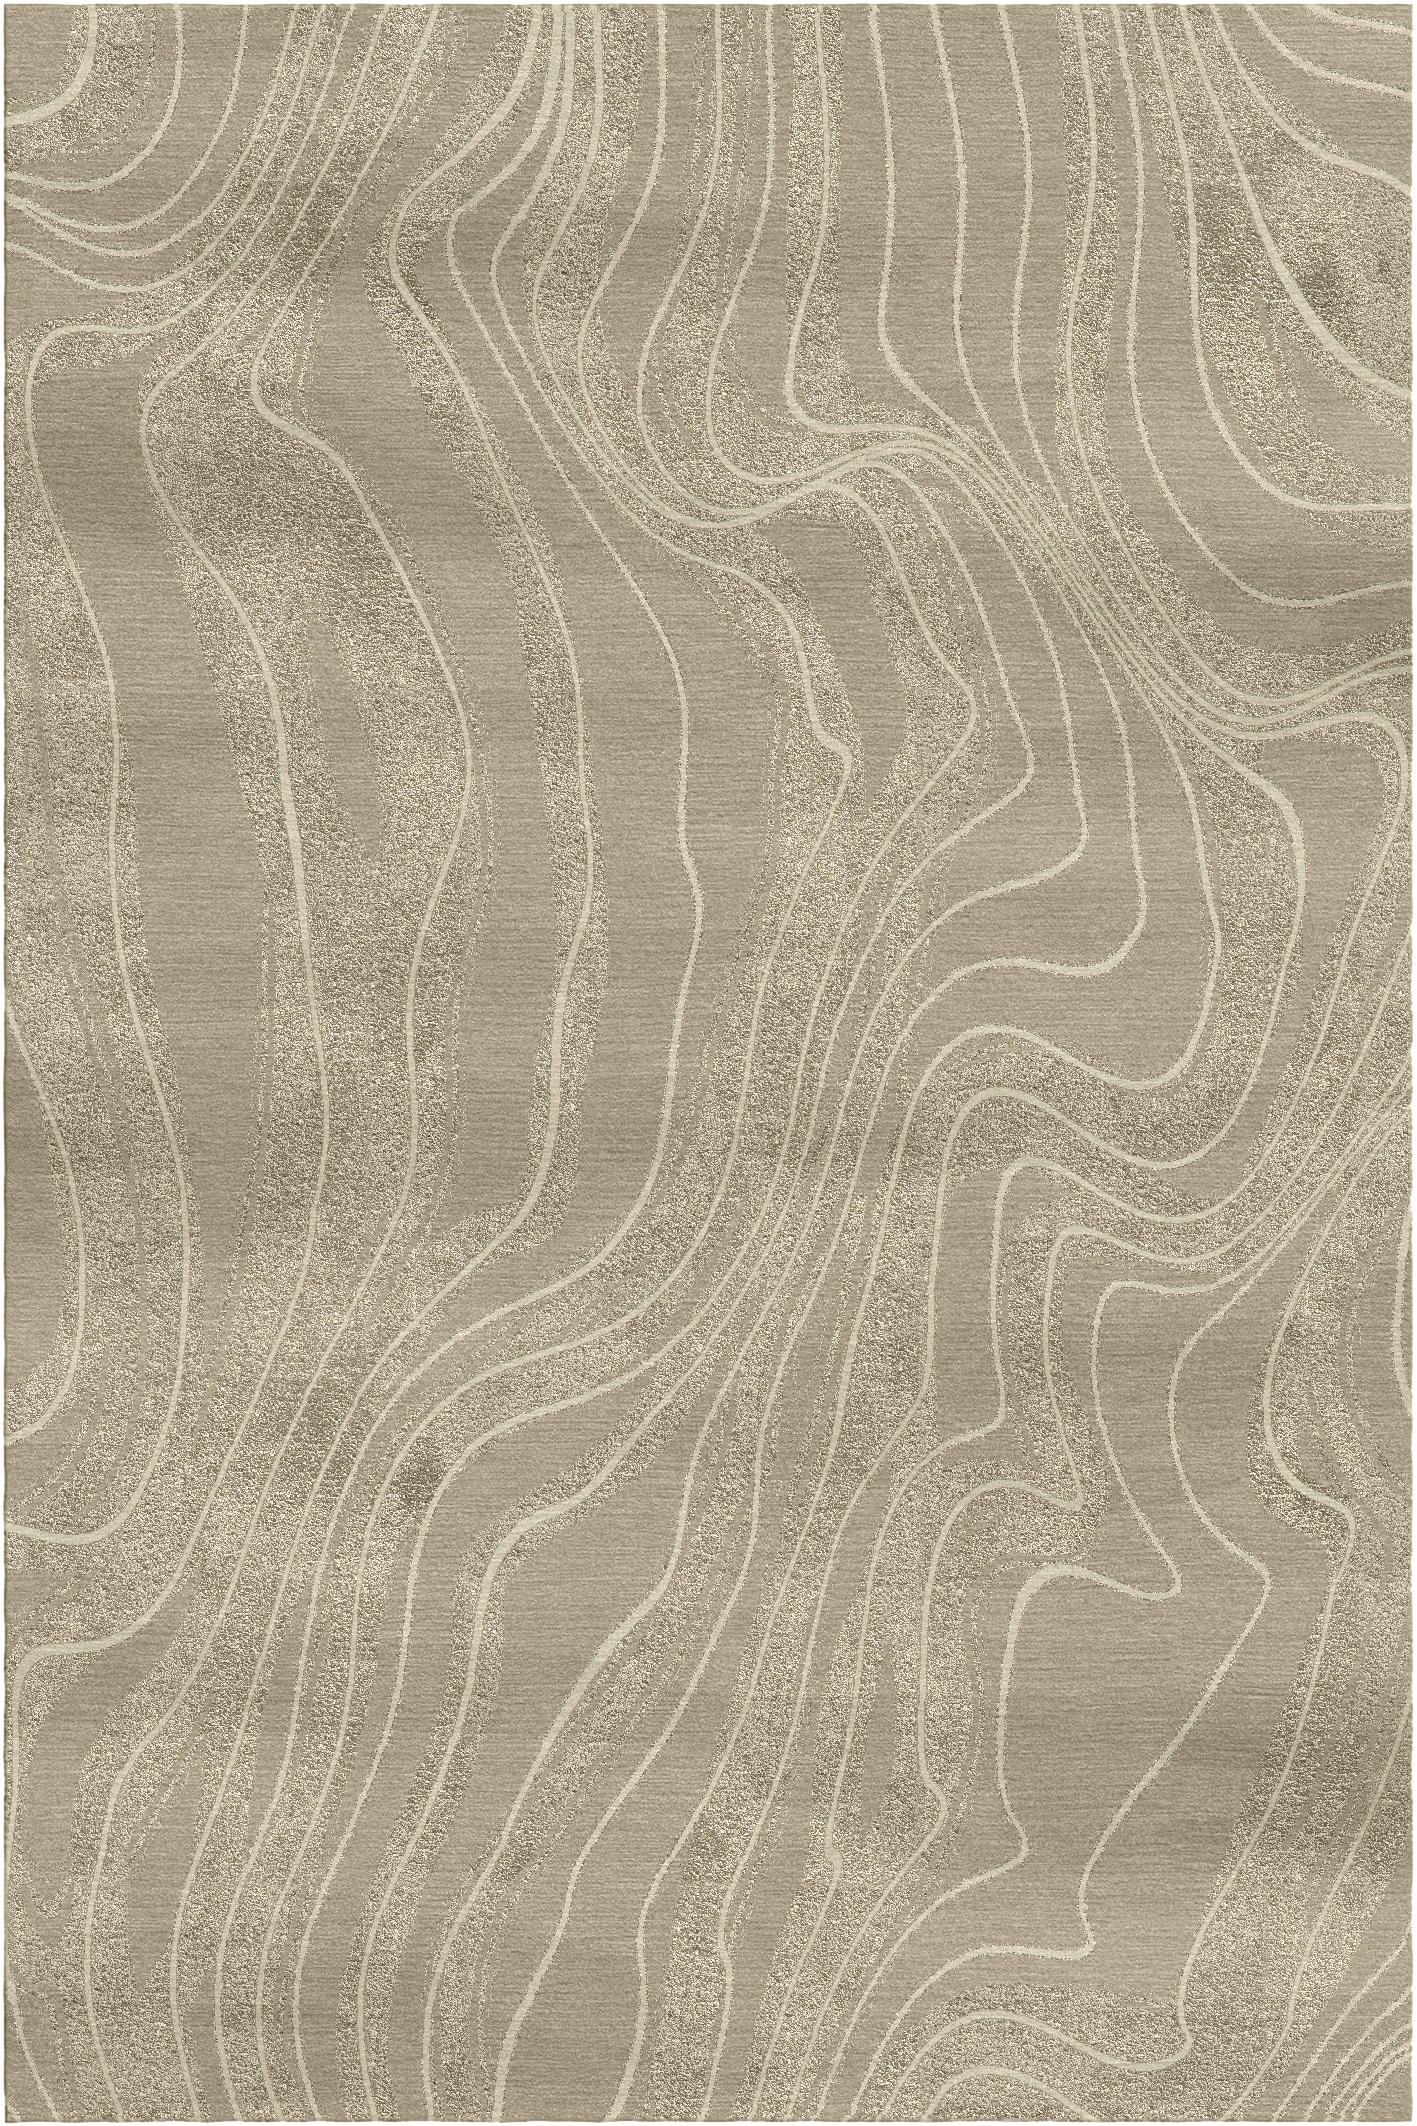 Deserto rug II by Giulio Brambilla
Dimensions: D 300 x W 200 x H 1.5 cm
Materials: NZ wool, bamboo silk
Available in other color.

A captivating motif of sinuous lines swirling over a soft background defines this sophisticated rug that will